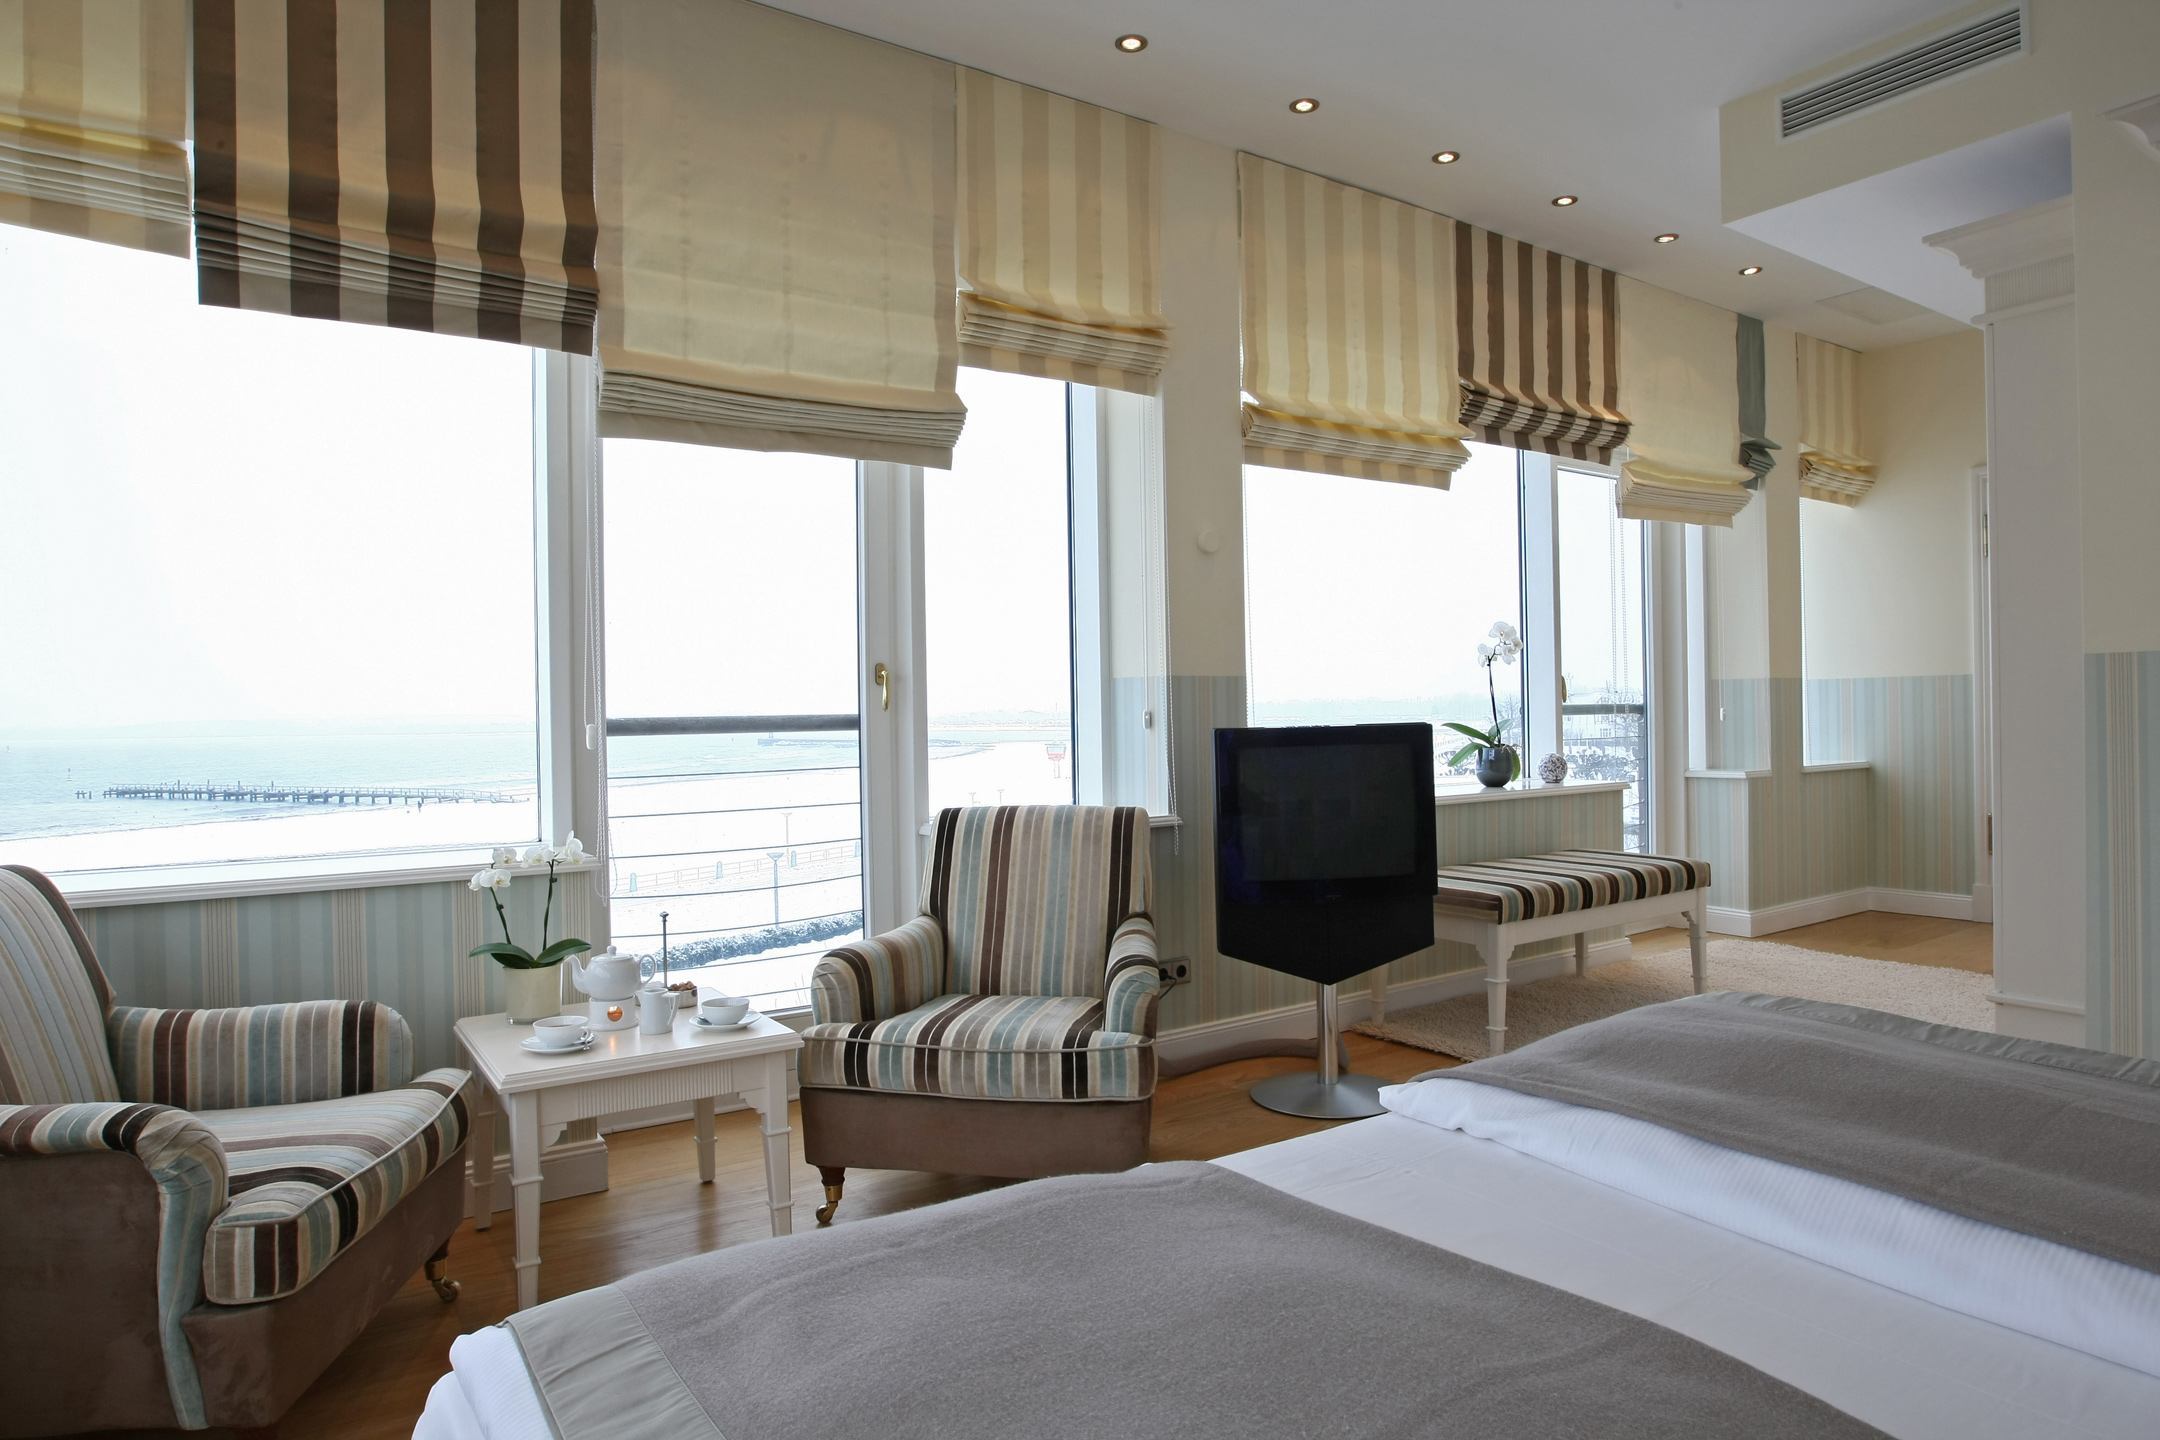 ATLANTIC Grand Hotel Travemünde comfort double room with a view over the Baltic Sea